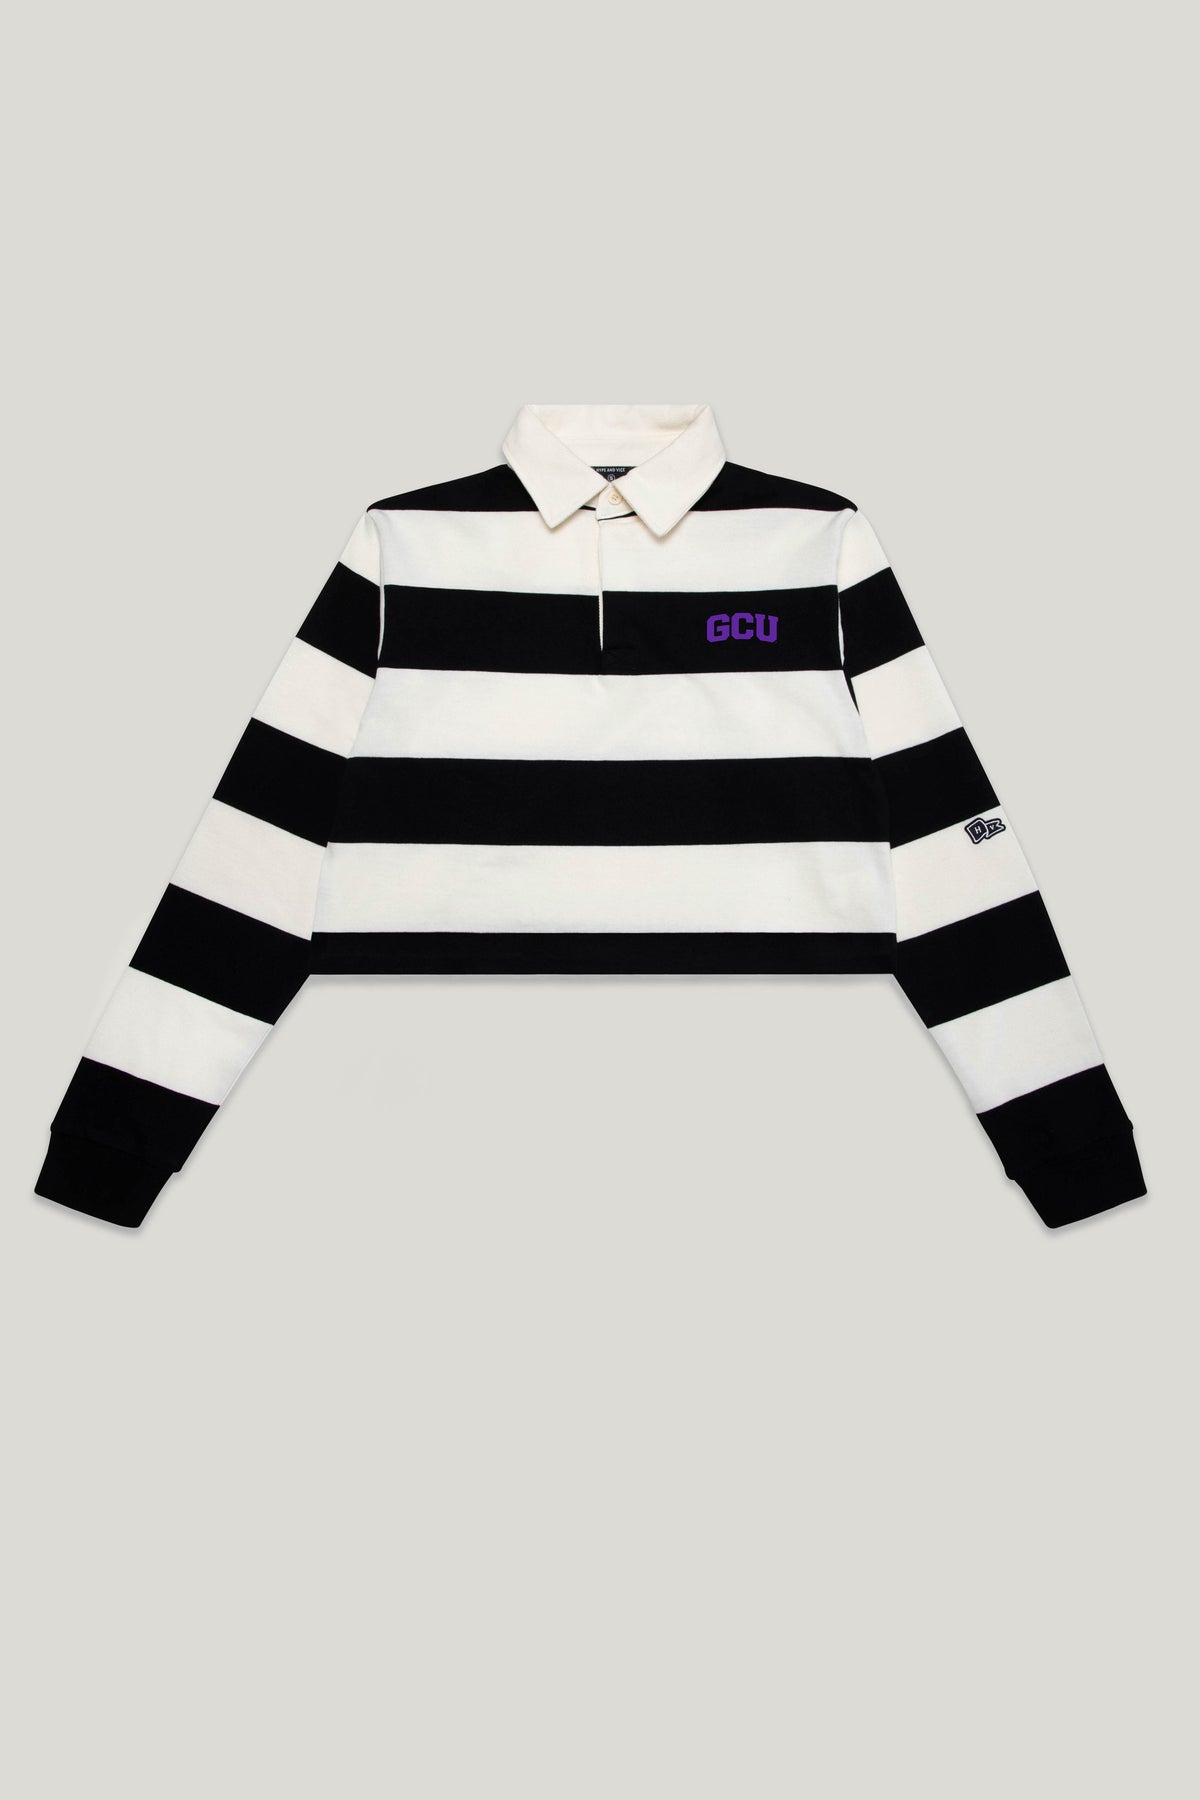 Grand Canyon University Rugby Top